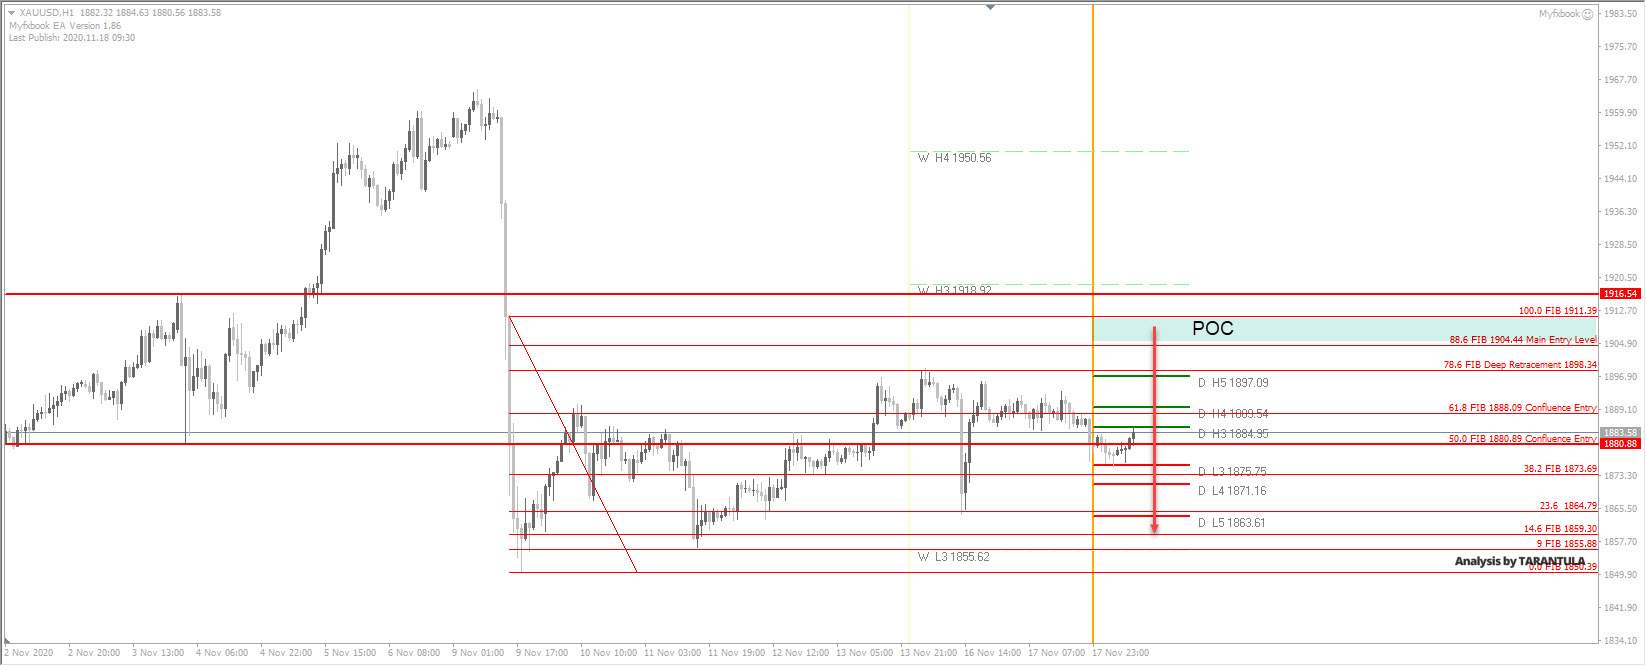 Gold Price News and Forecast: XAU/USD look for more downside to come